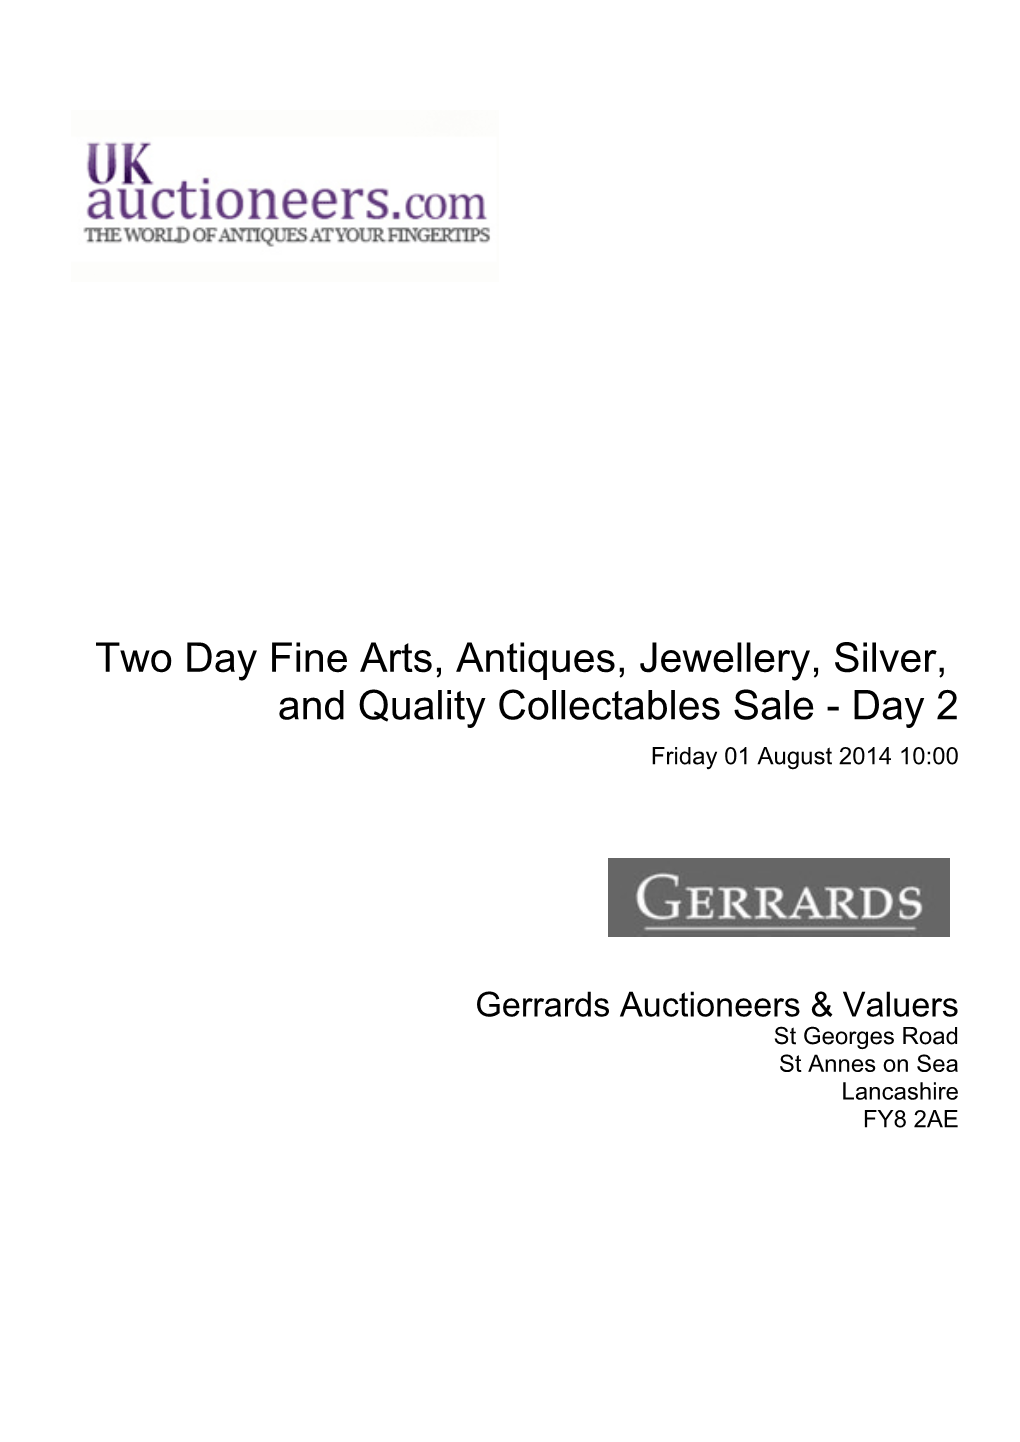 Two Day Fine Arts, Antiques, Jewellery, Silver, and Quality Collectables Sale - Day 2 Friday 01 August 2014 10:00